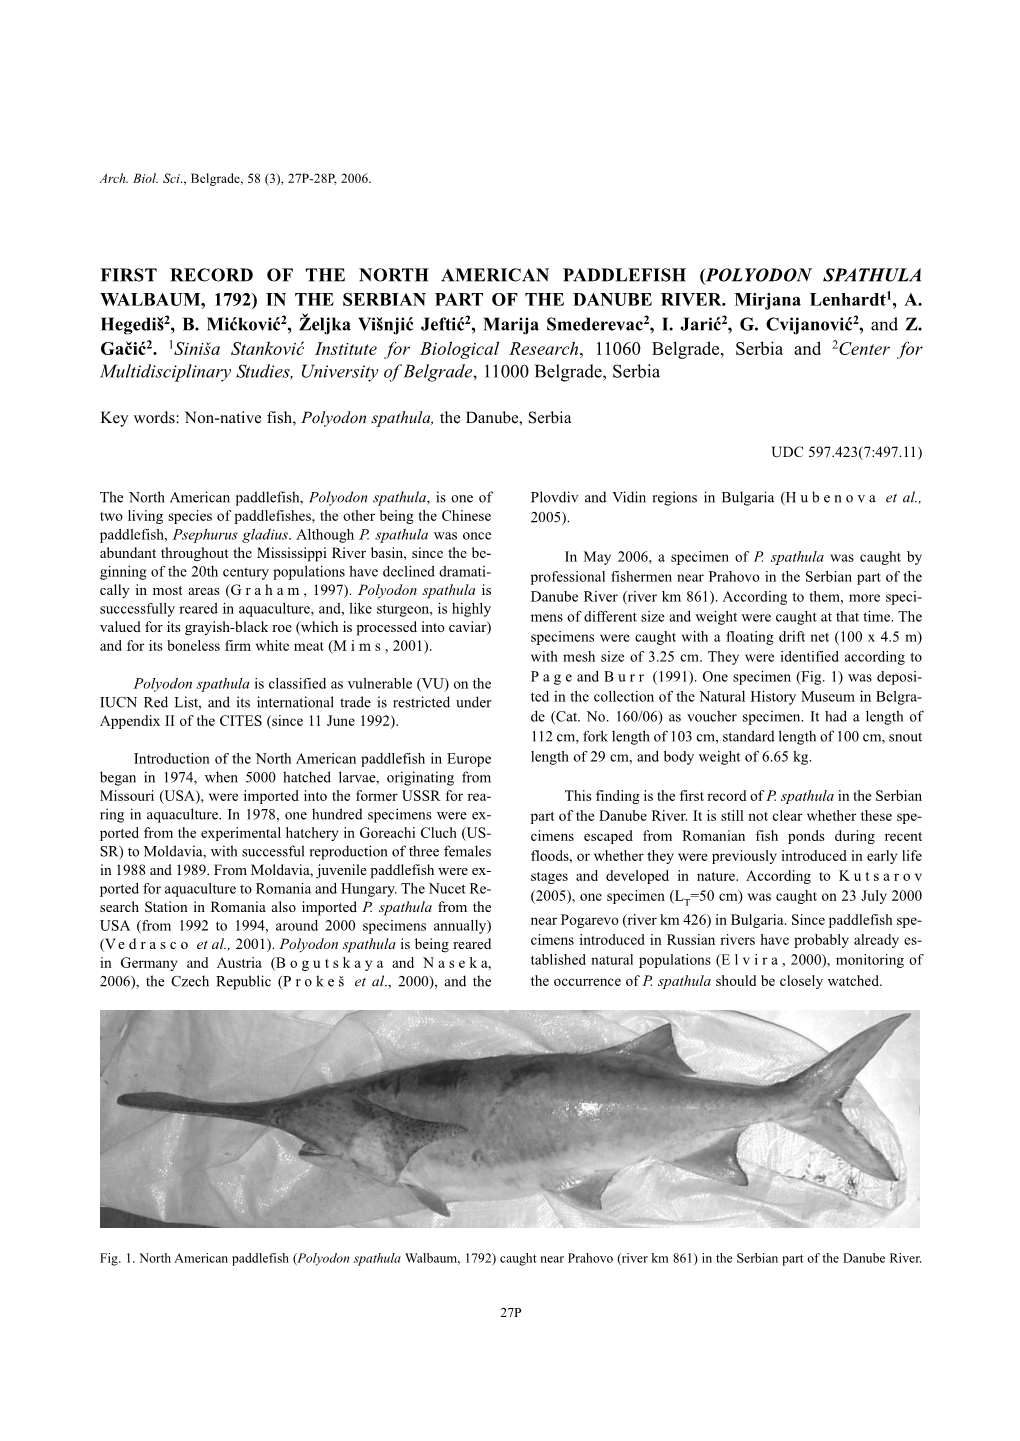 First Record of the North American Paddlefish (Polyodon Spathula Walbaum, 1792) in the Serbian Part of the Danube River